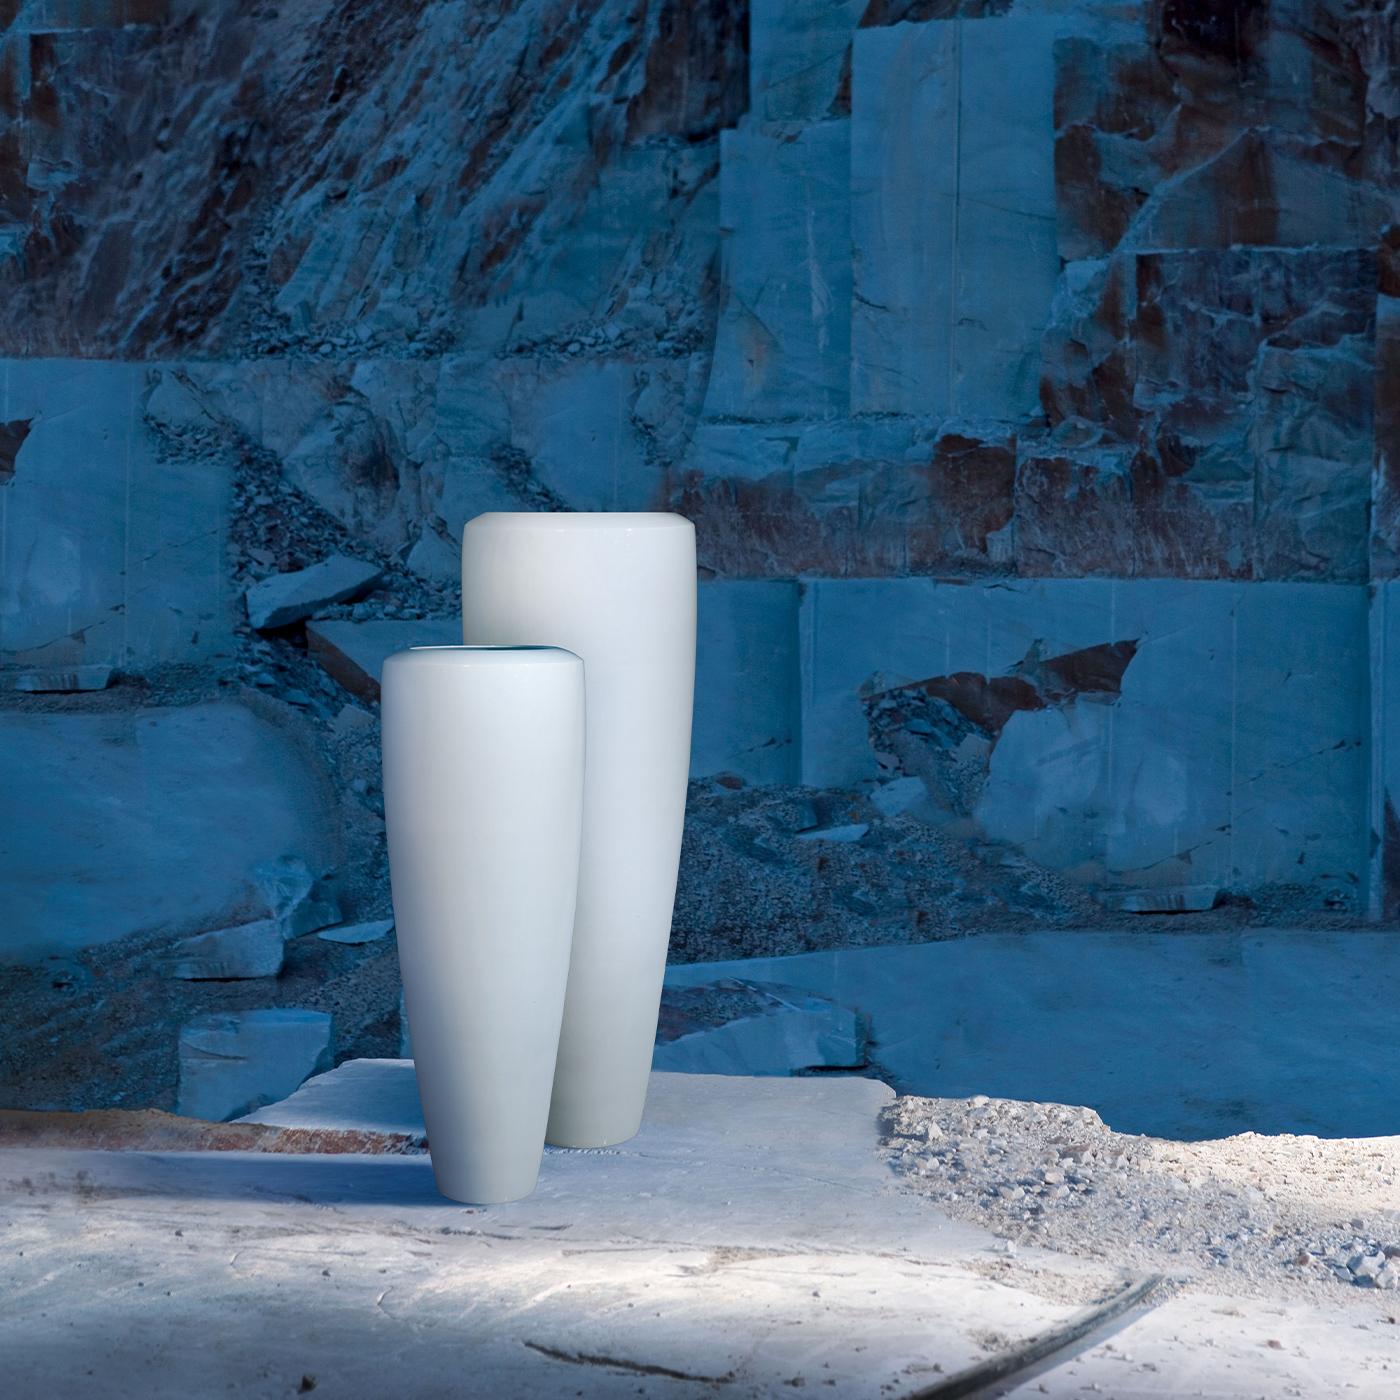 Handcrafted of LDPE (Low Density Polyethylene), a 100% recyclable and durable thermoplastic, this tall vase belongs to the Obice Collection. ?Ideal for indoor and outdoor use in luxury gardens, hotels, as well as lofts, the sleek, elongated